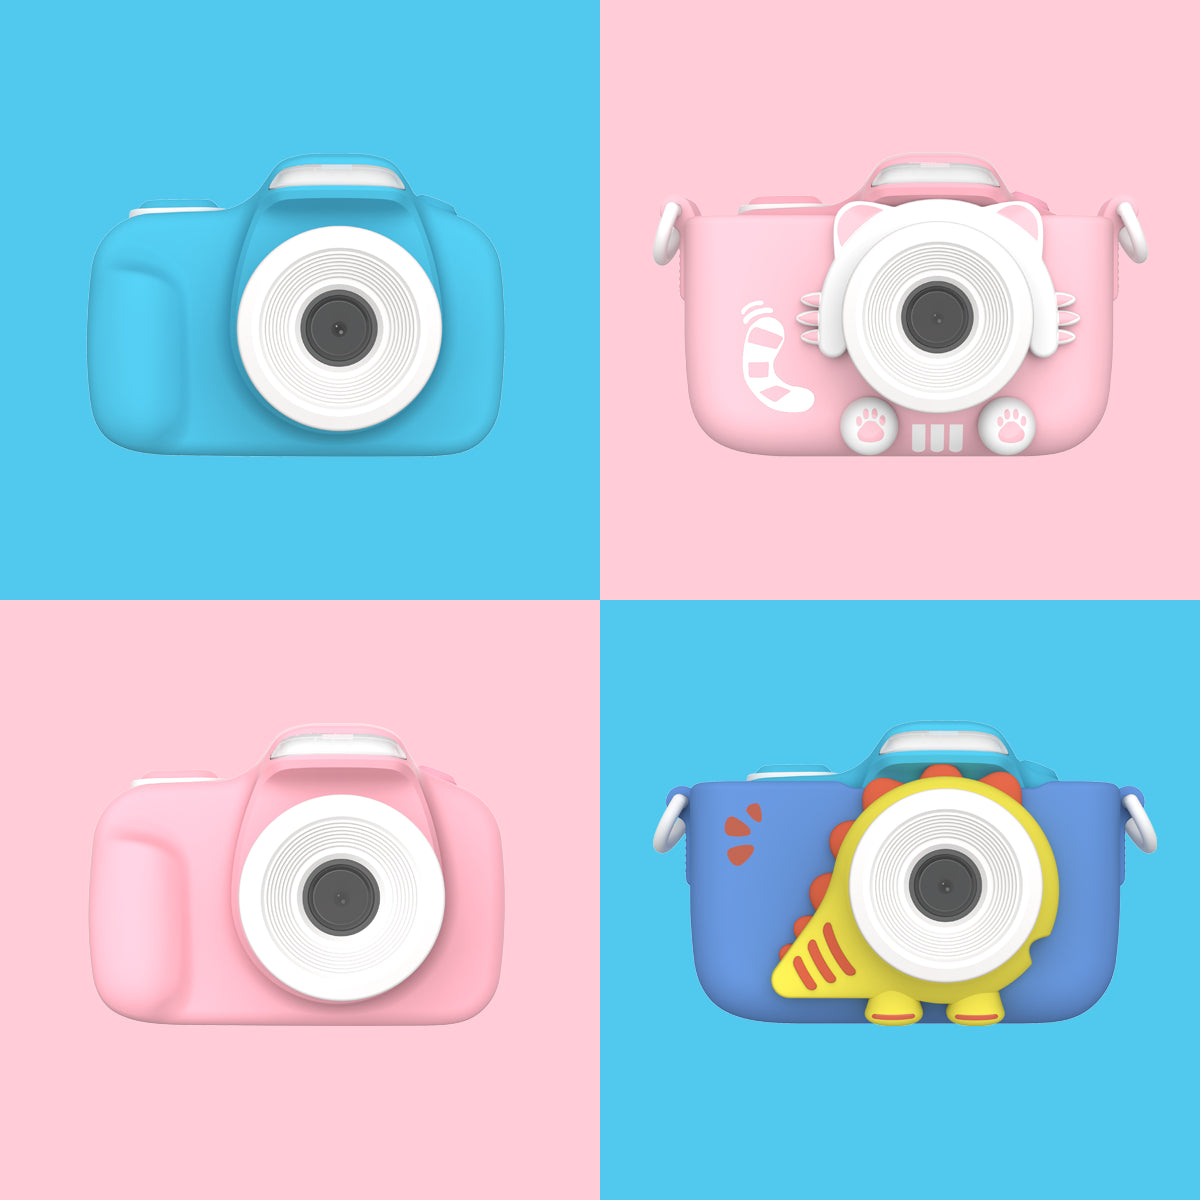 myFirst Camera 3 Frames - 16MP Mini Camera for kids with selfie lens